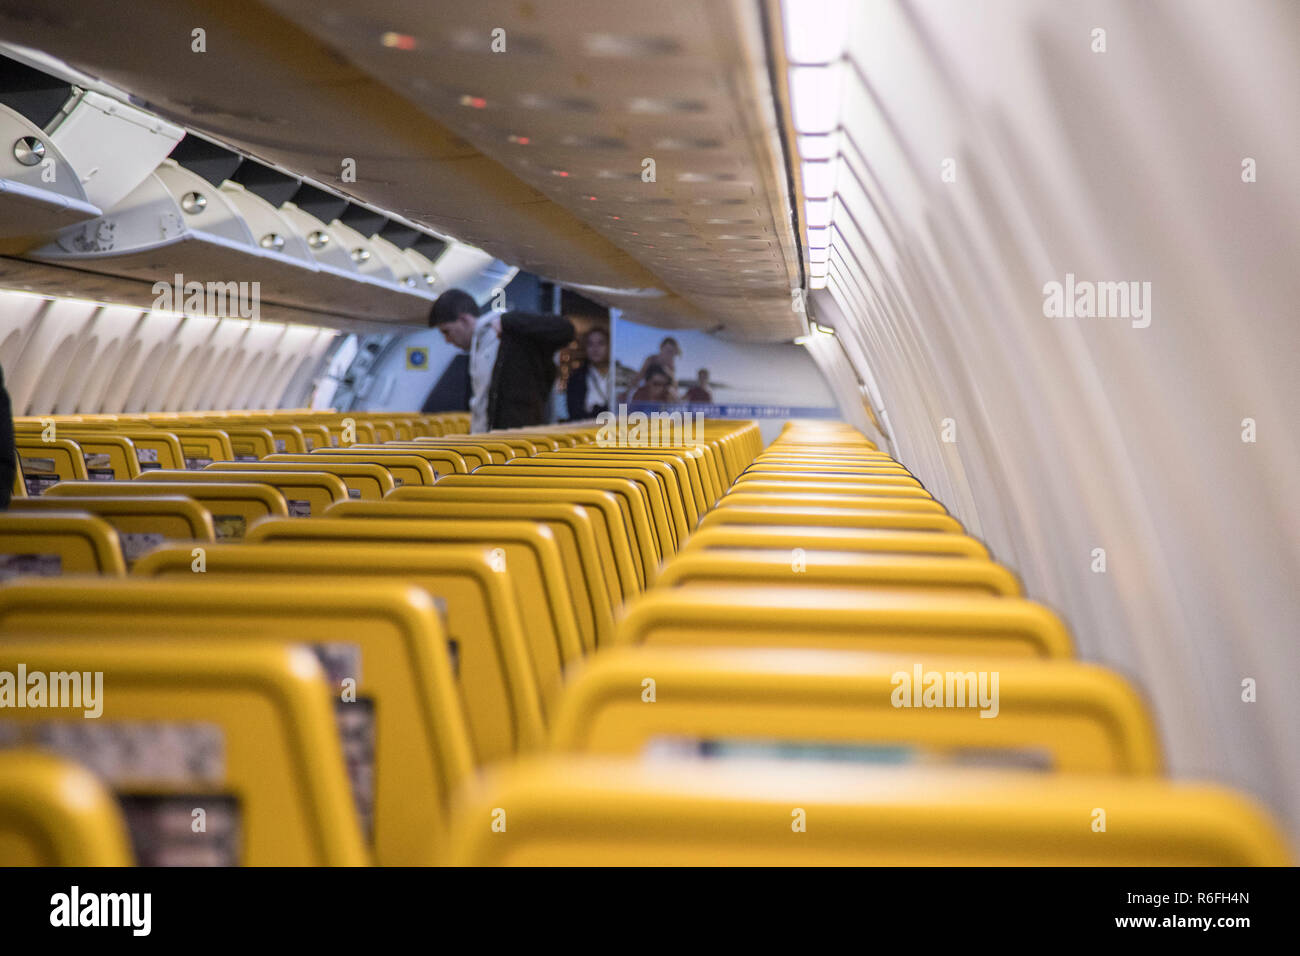 The new Boeing Sky Interior cabin of Ryanair. the aircraft is a Boeing  737-800 specifically a Boeing 737 Next Gen or 737-8AS(WL) with registration  EI-FZL. Ryanair is a low cost carrier based